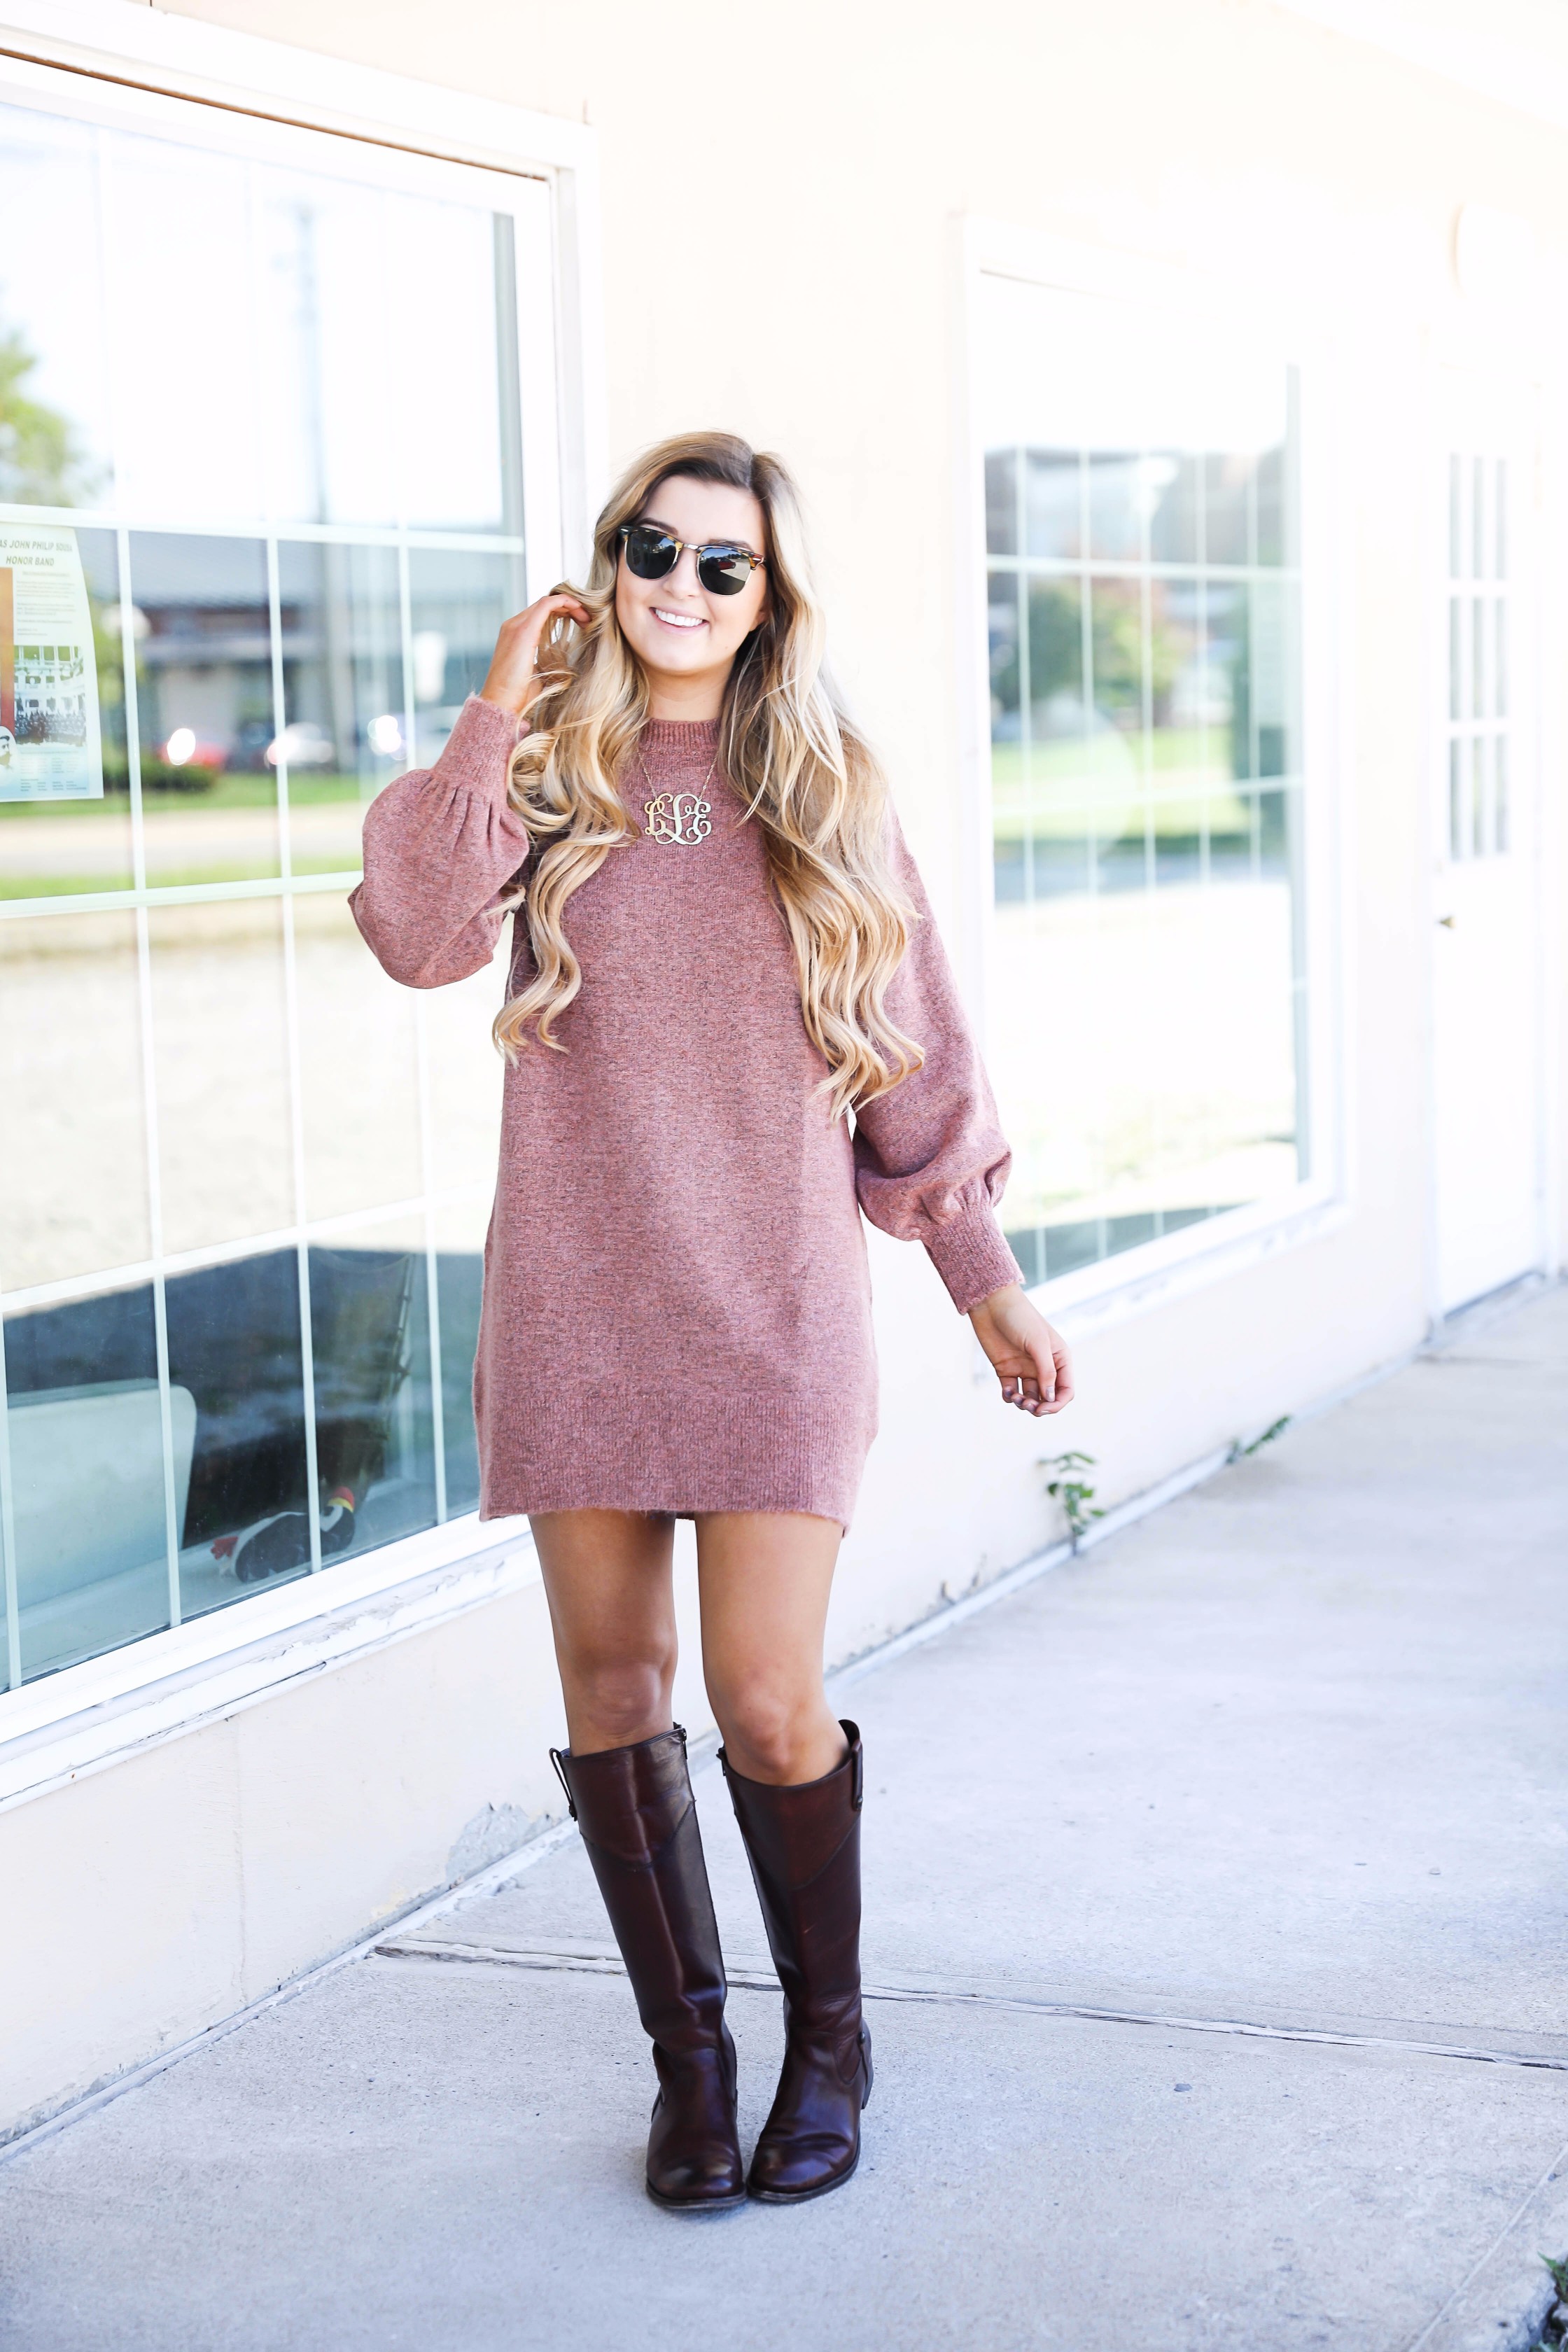 Sweater dress with puffy sleeves and brown riding boots! Paired with a large monogram necklace, perfect fall outfit! Details on fashion blog daily dose of charm by lauren lindmark